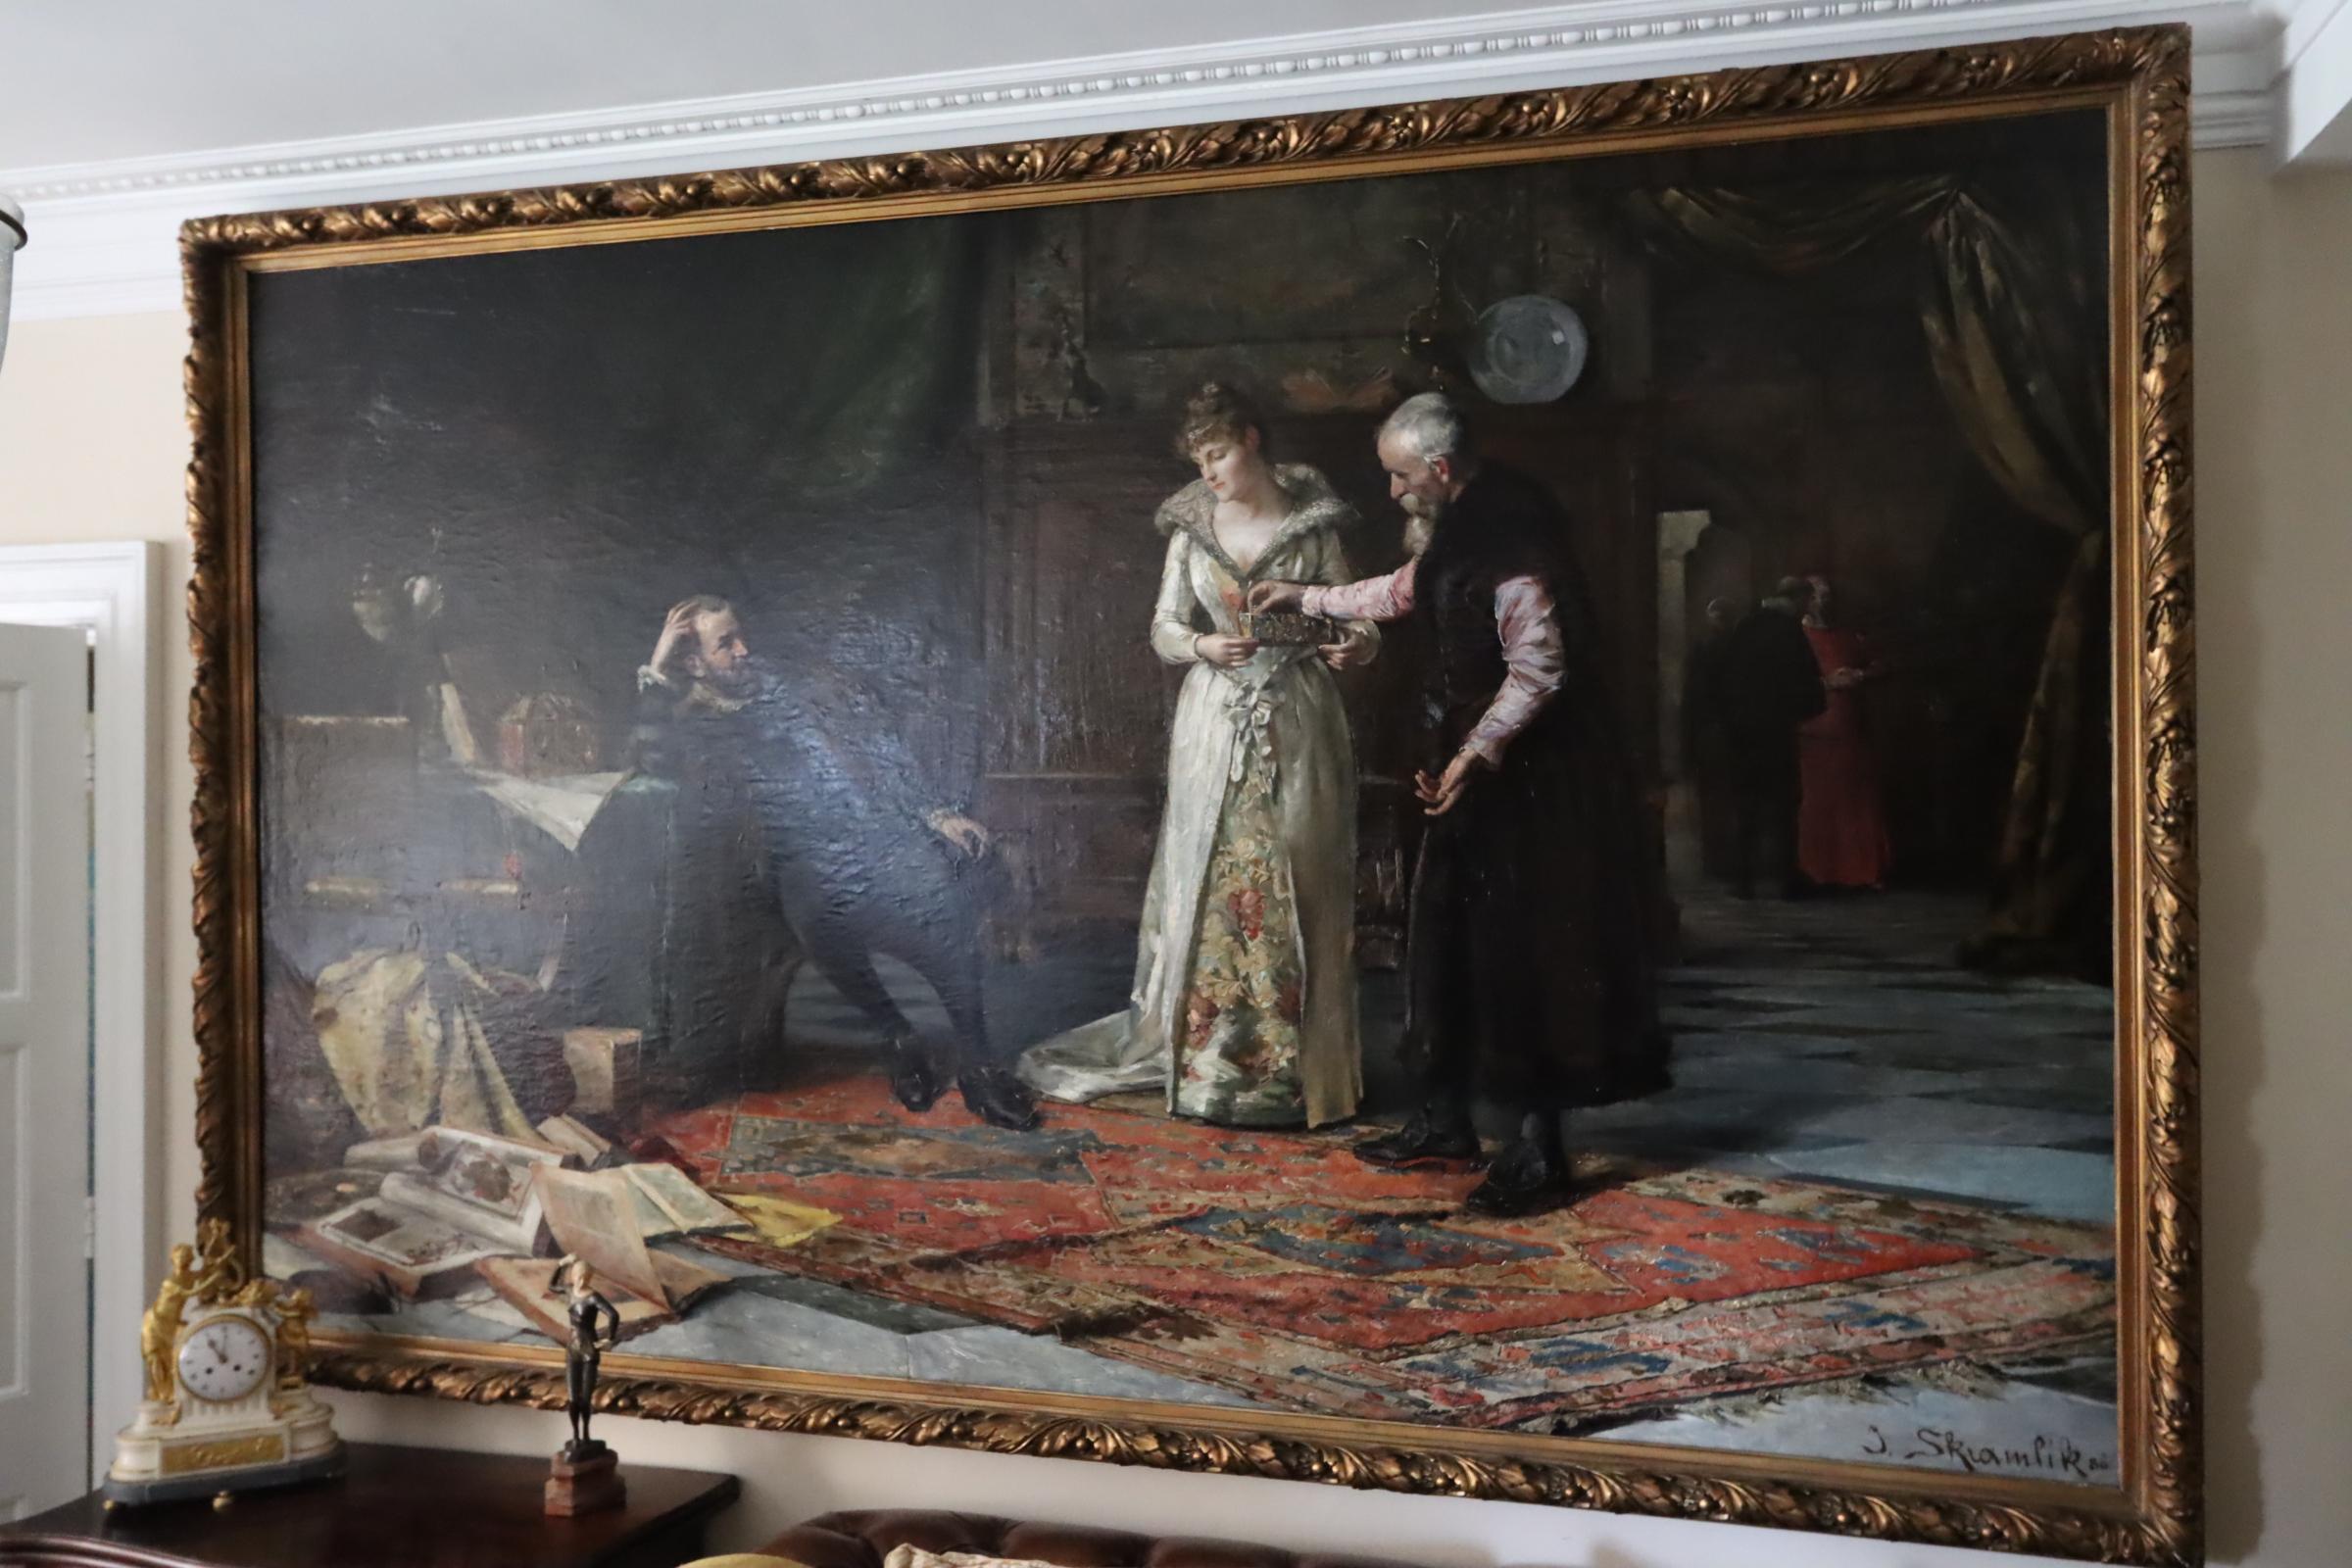 Jan Skramlik (1860-1936), Negotiating the dowry, oil on canvas, 1886, signed and dated, c. 282 x 178 cm, with frame approx. 292x194 cm.

This is a beautiful example by Jan, its sheer proportions show off his artistic nature.

The Czech artist Jan